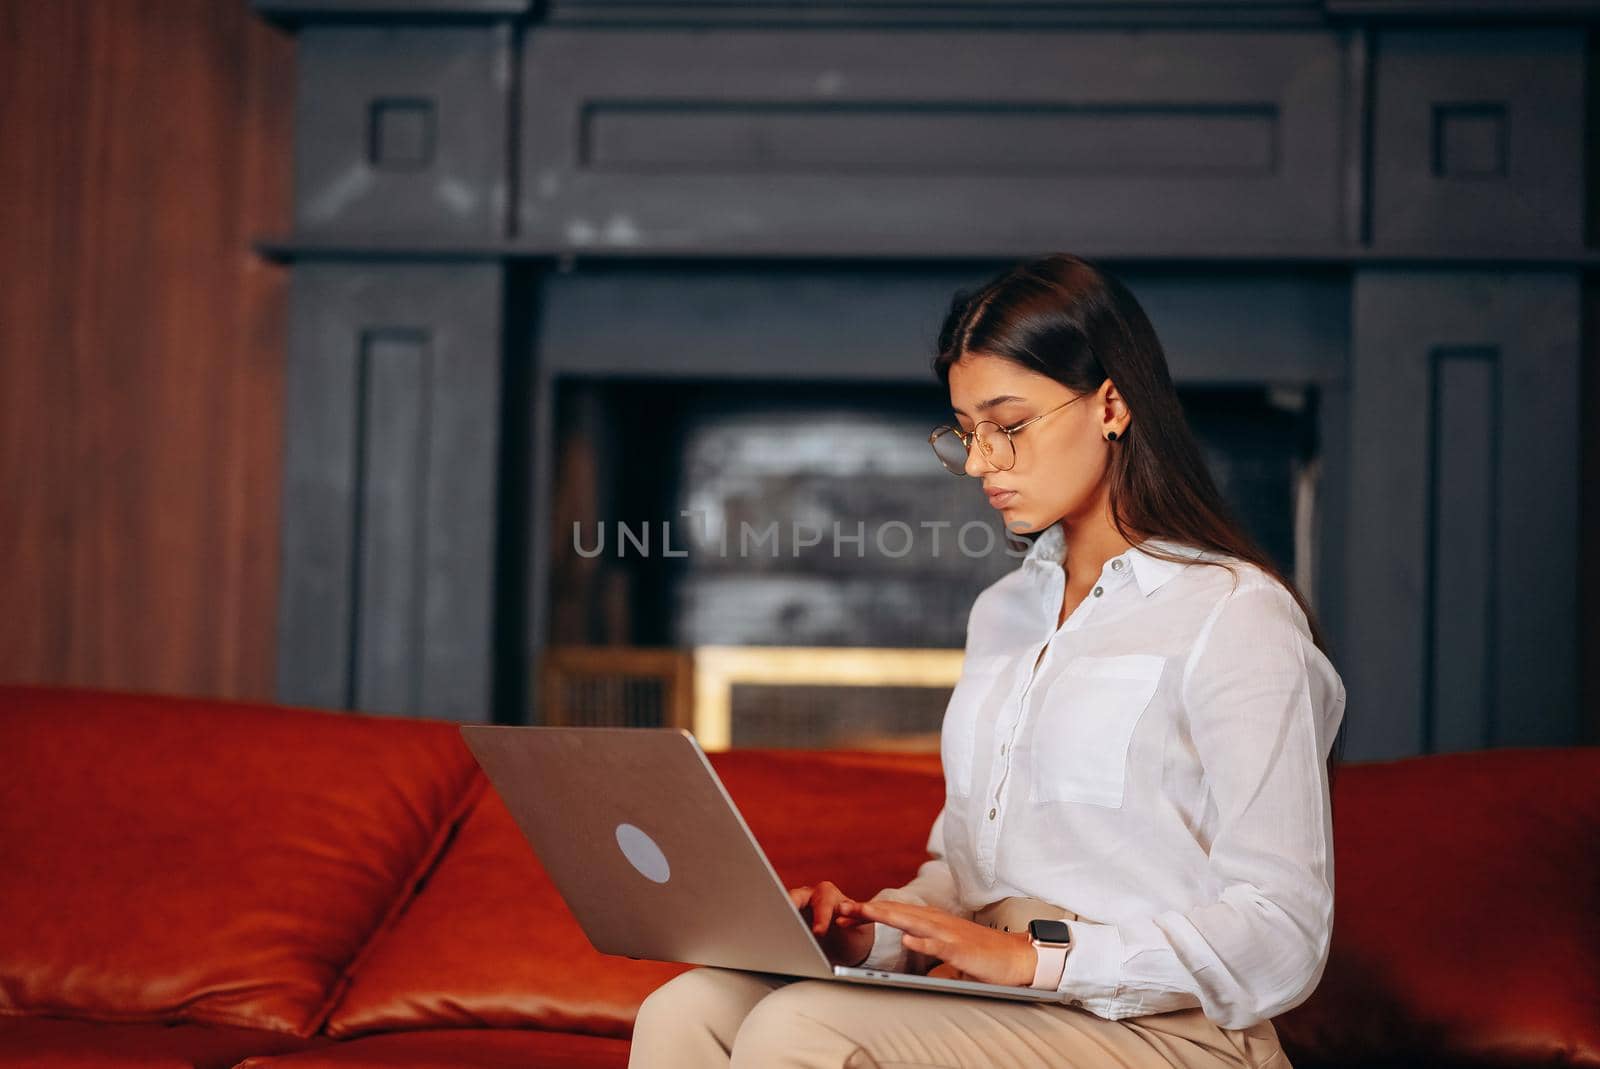 Young woman sits on a red sofa while working at a laptop. Woman hands typing on laptop keyboard.